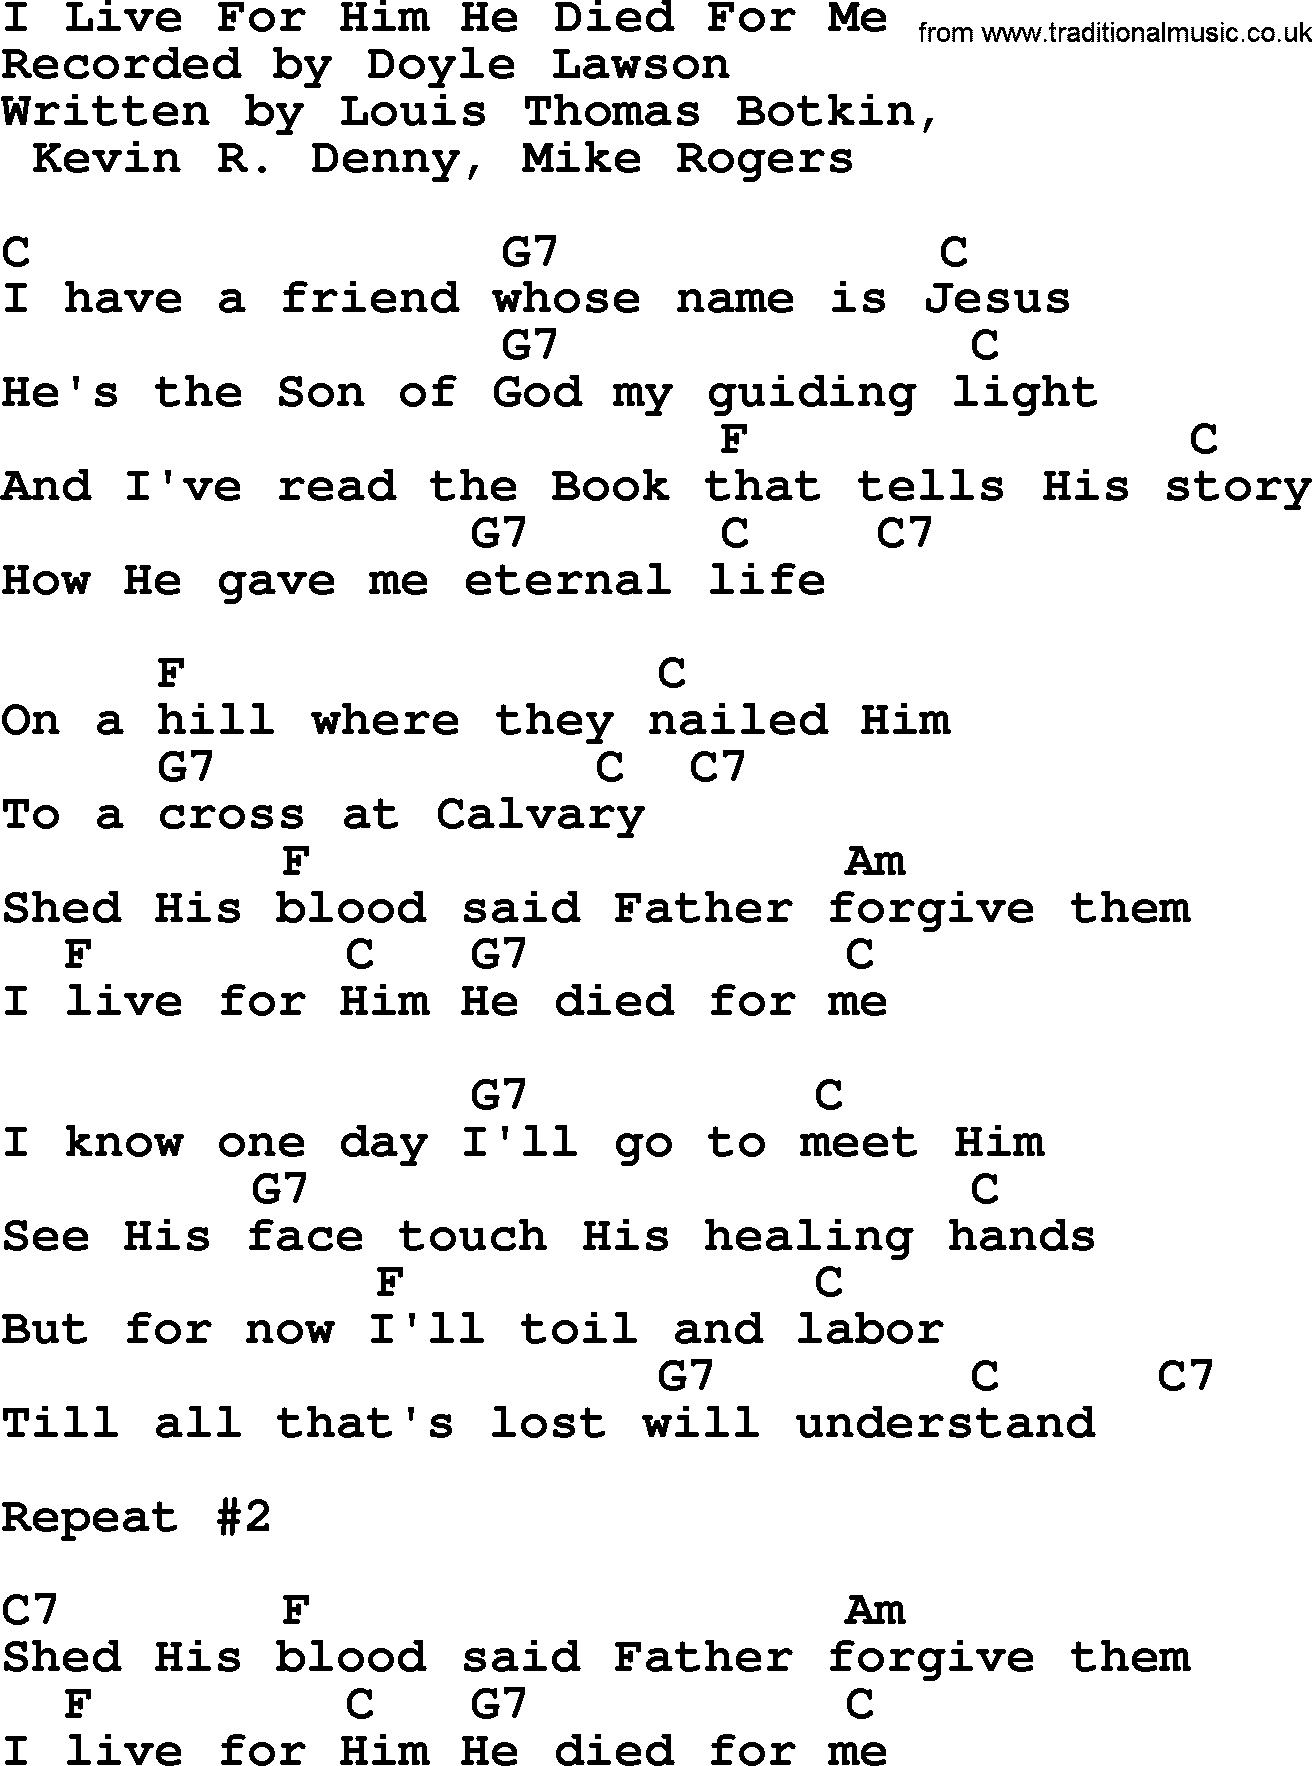 Bluegrass song: I Live For Him He Died For Me, lyrics and chords